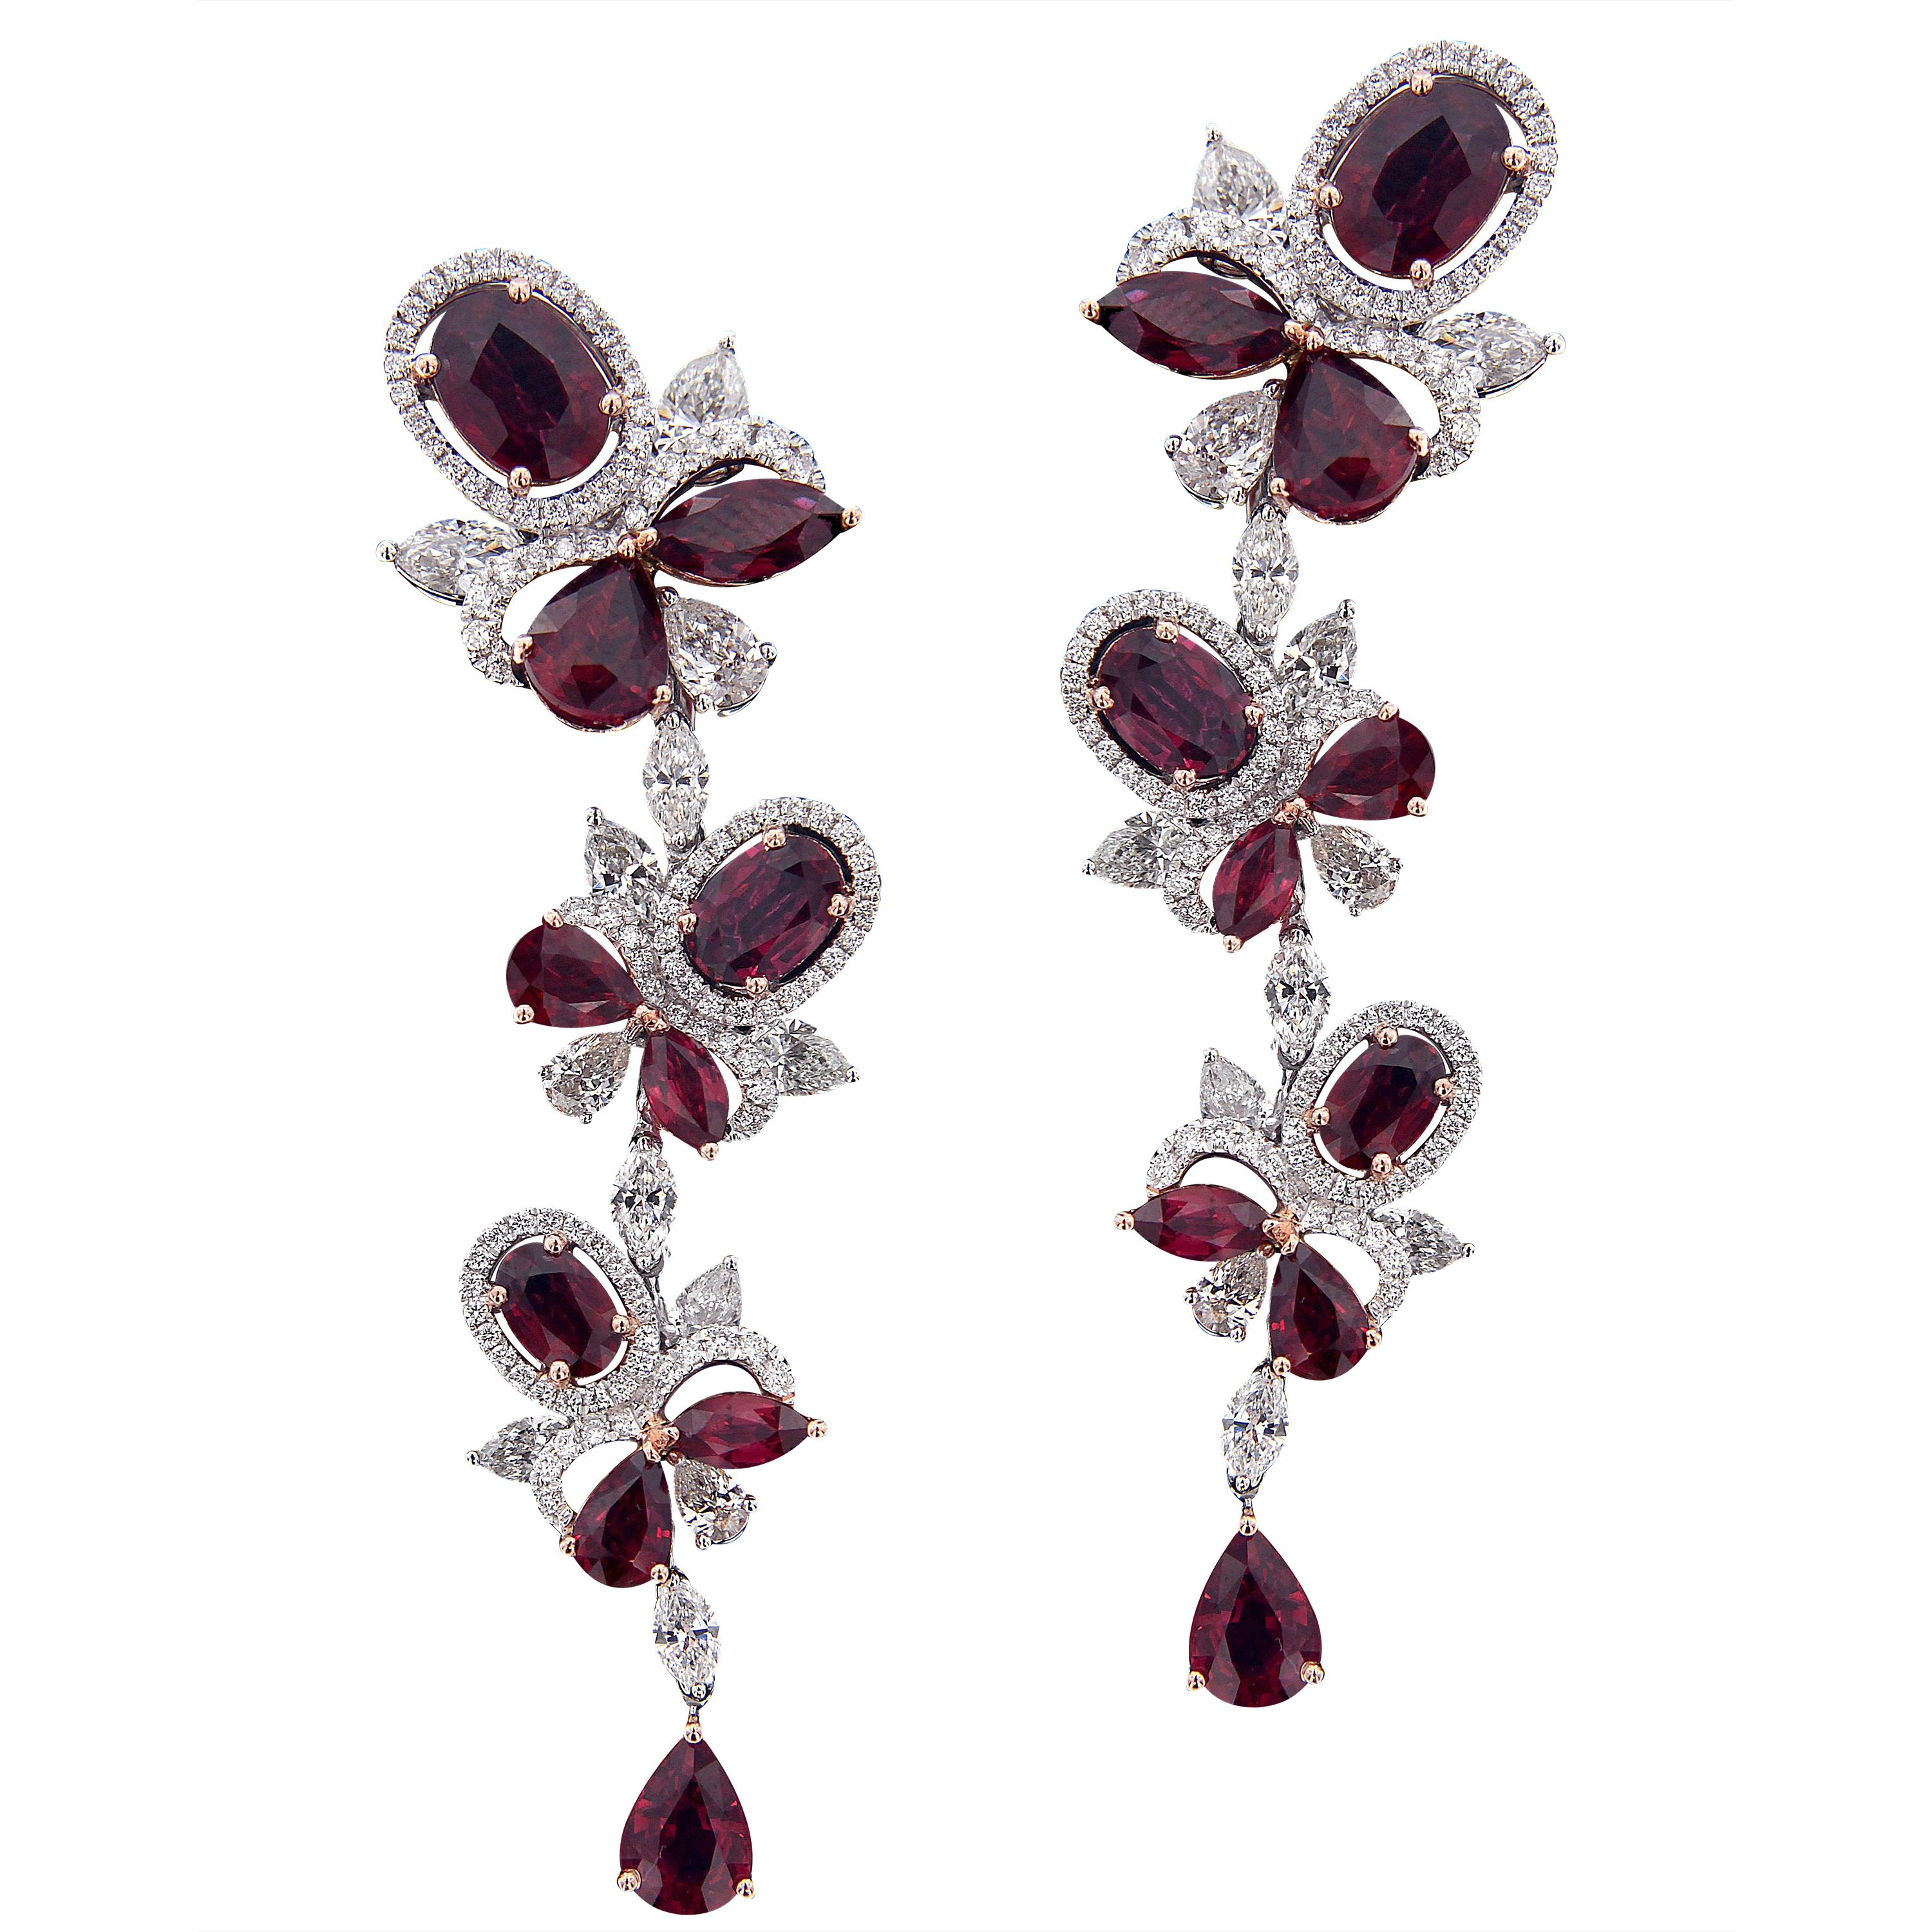 Exquisite 18 Karat White Gold, Diamonds and Ruby Earrings For Sale